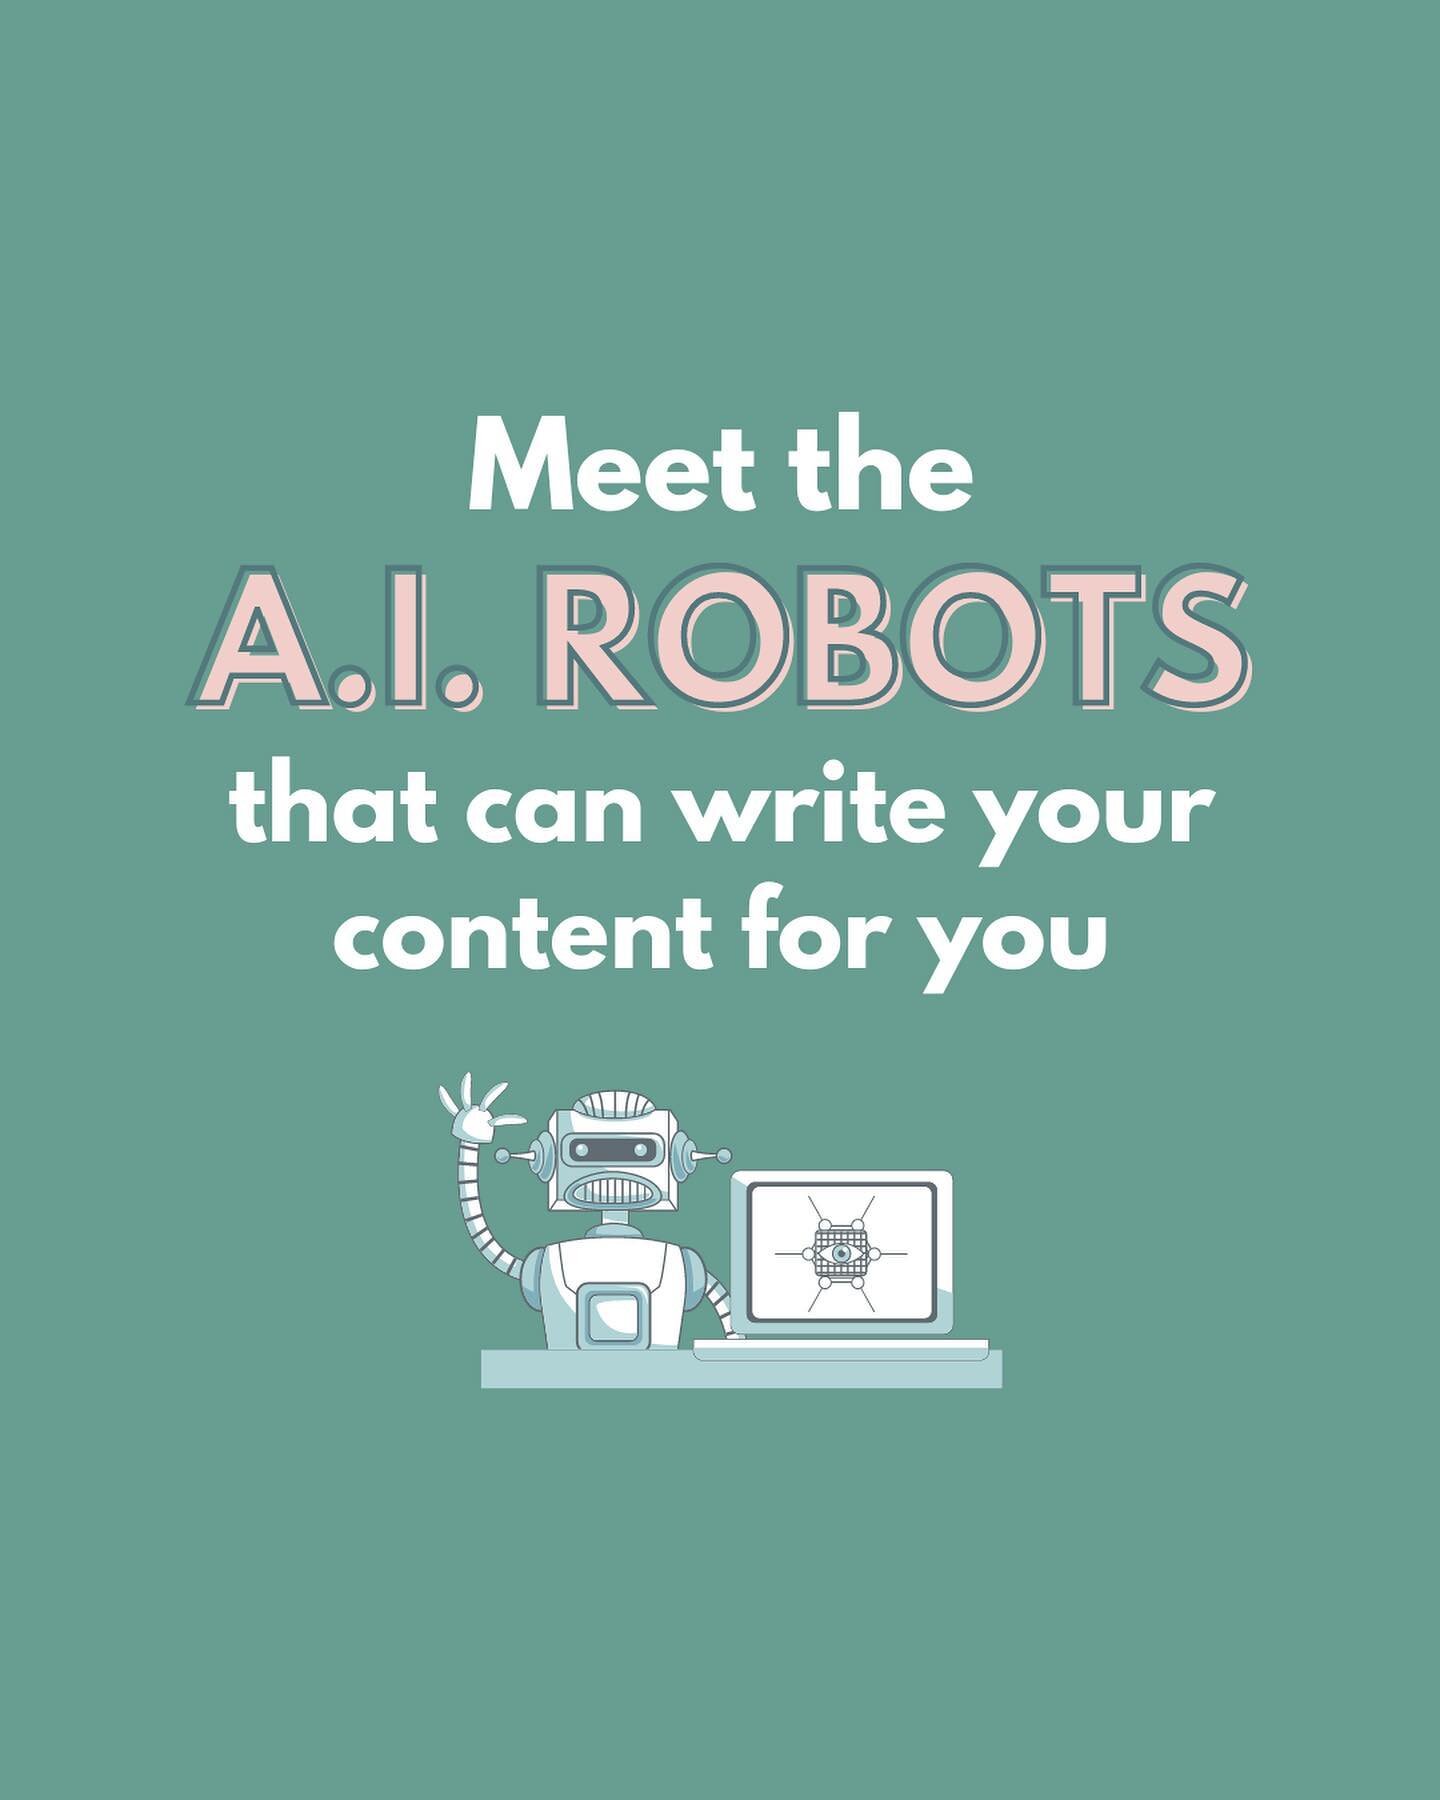 Looking for a little help with your Content Creation? AI writing assistants are revolutionising the world of Social Media and Digital Marketing! With the rise of AI technology, these tools have become more accessible and powerful than ever before. 

